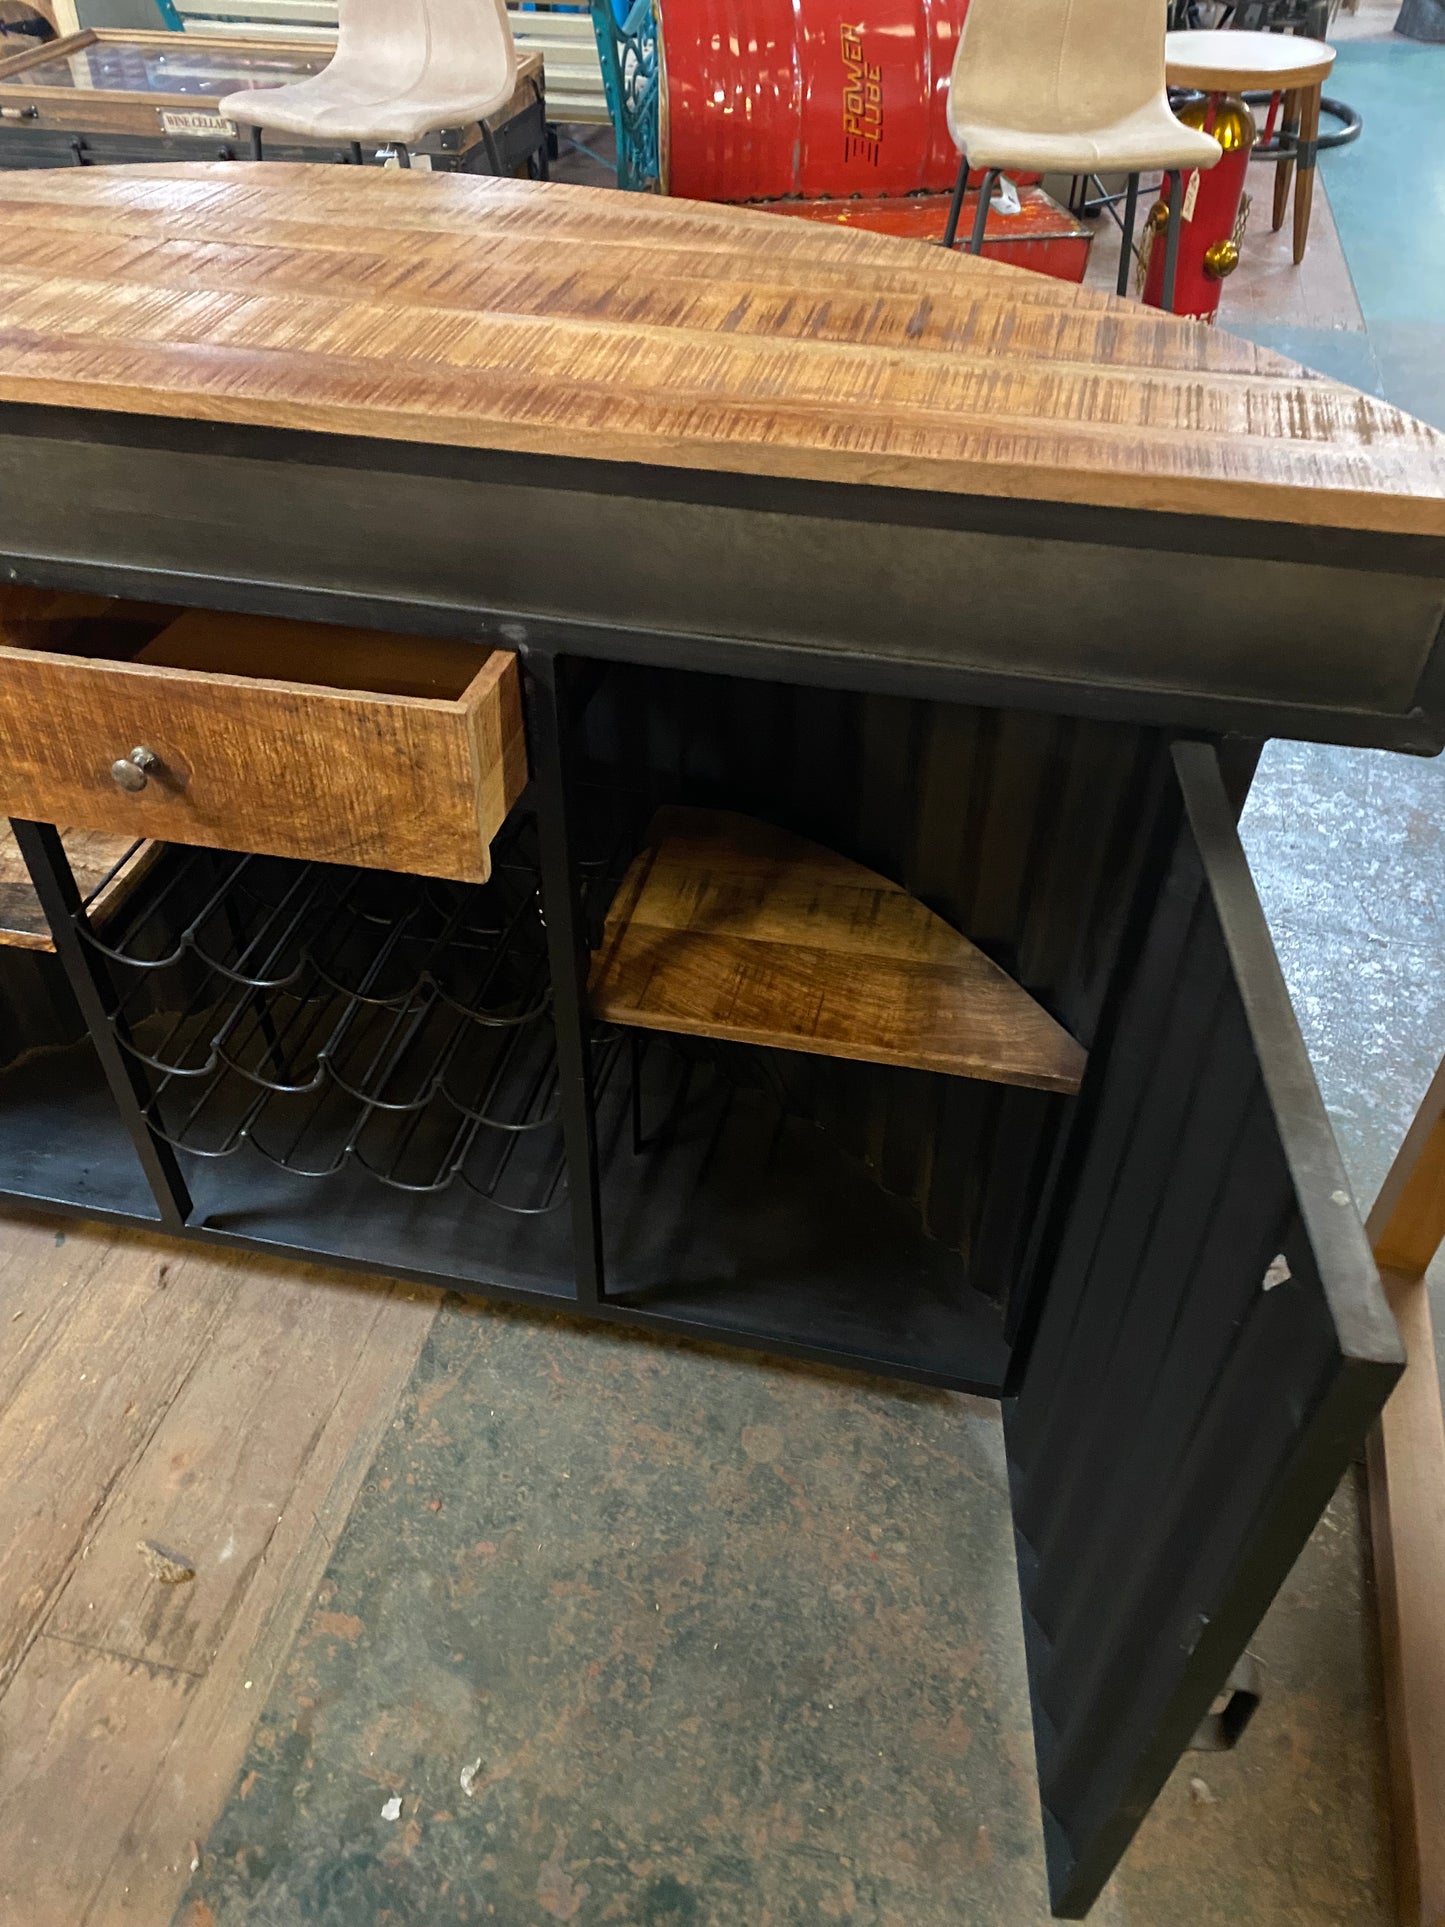 Large Bow Fronted Bar Unit